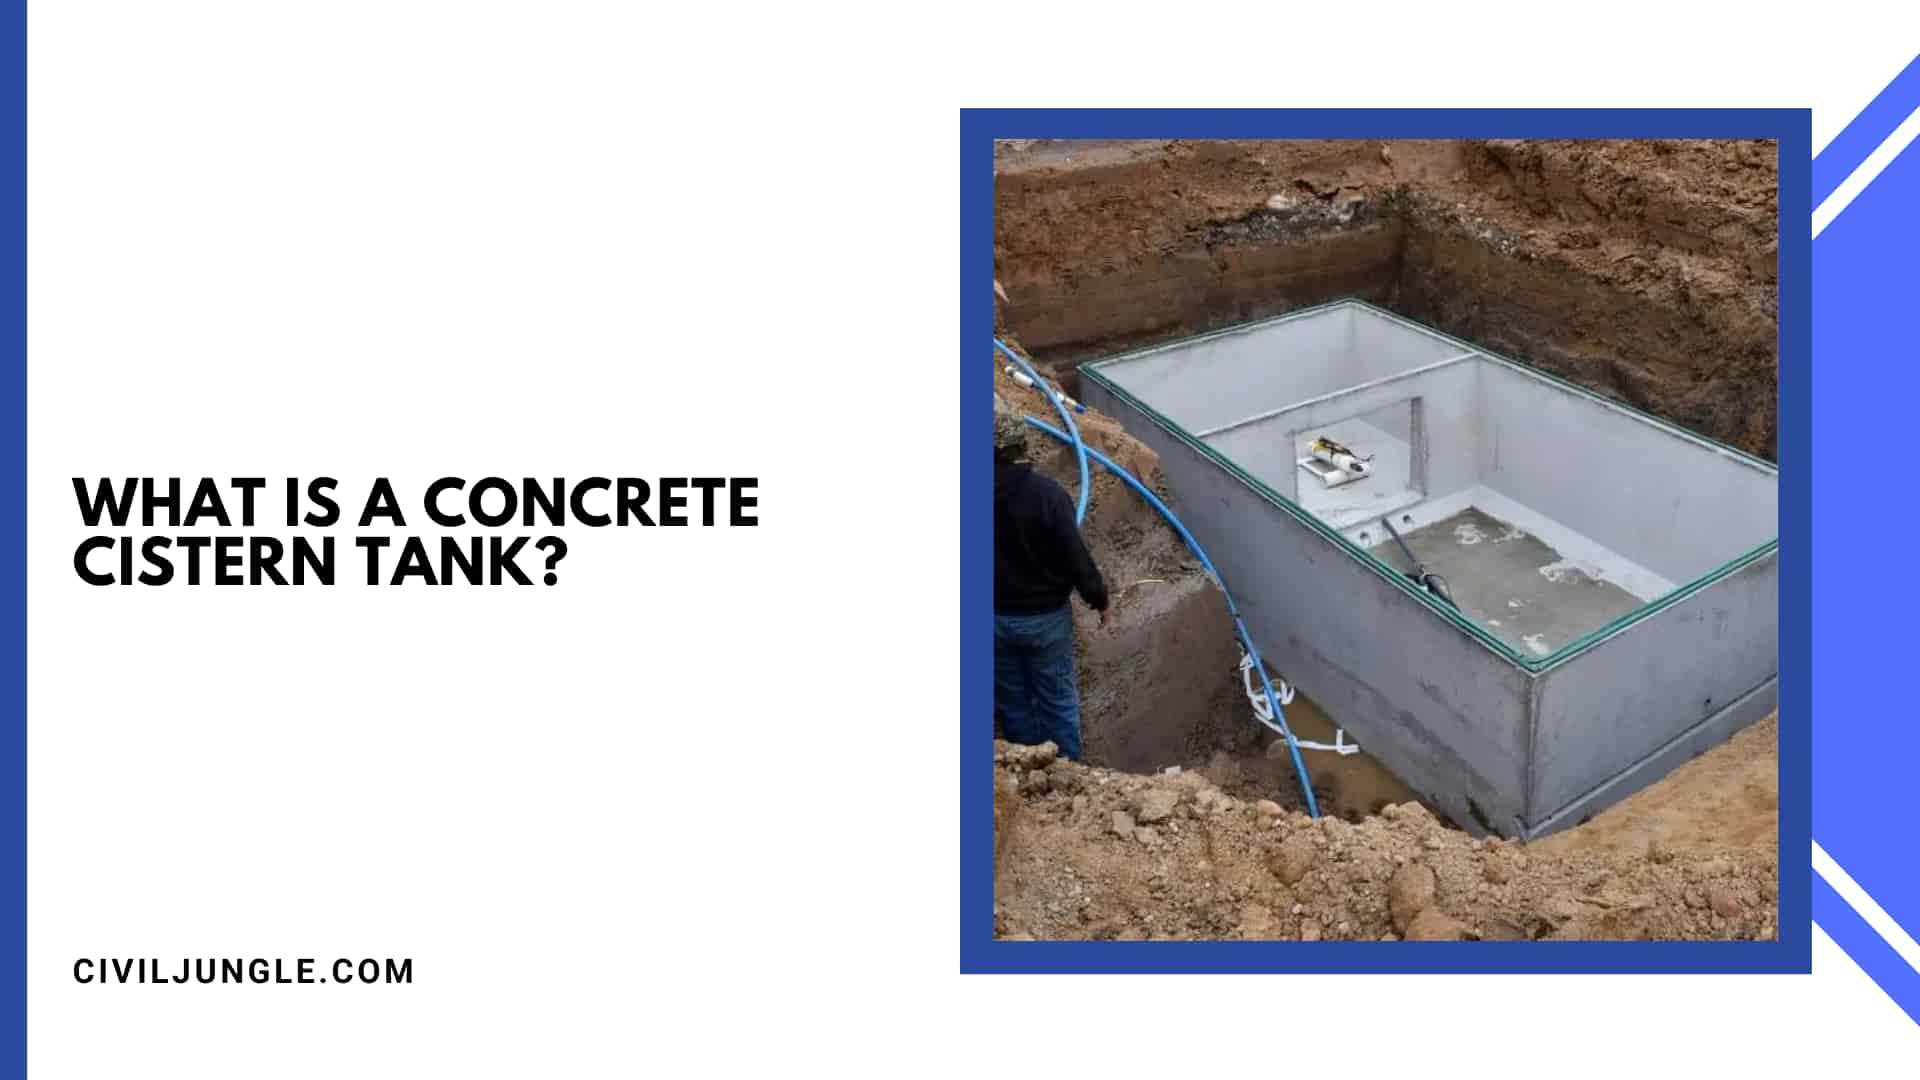 What Is a Concrete Cistern Tank?